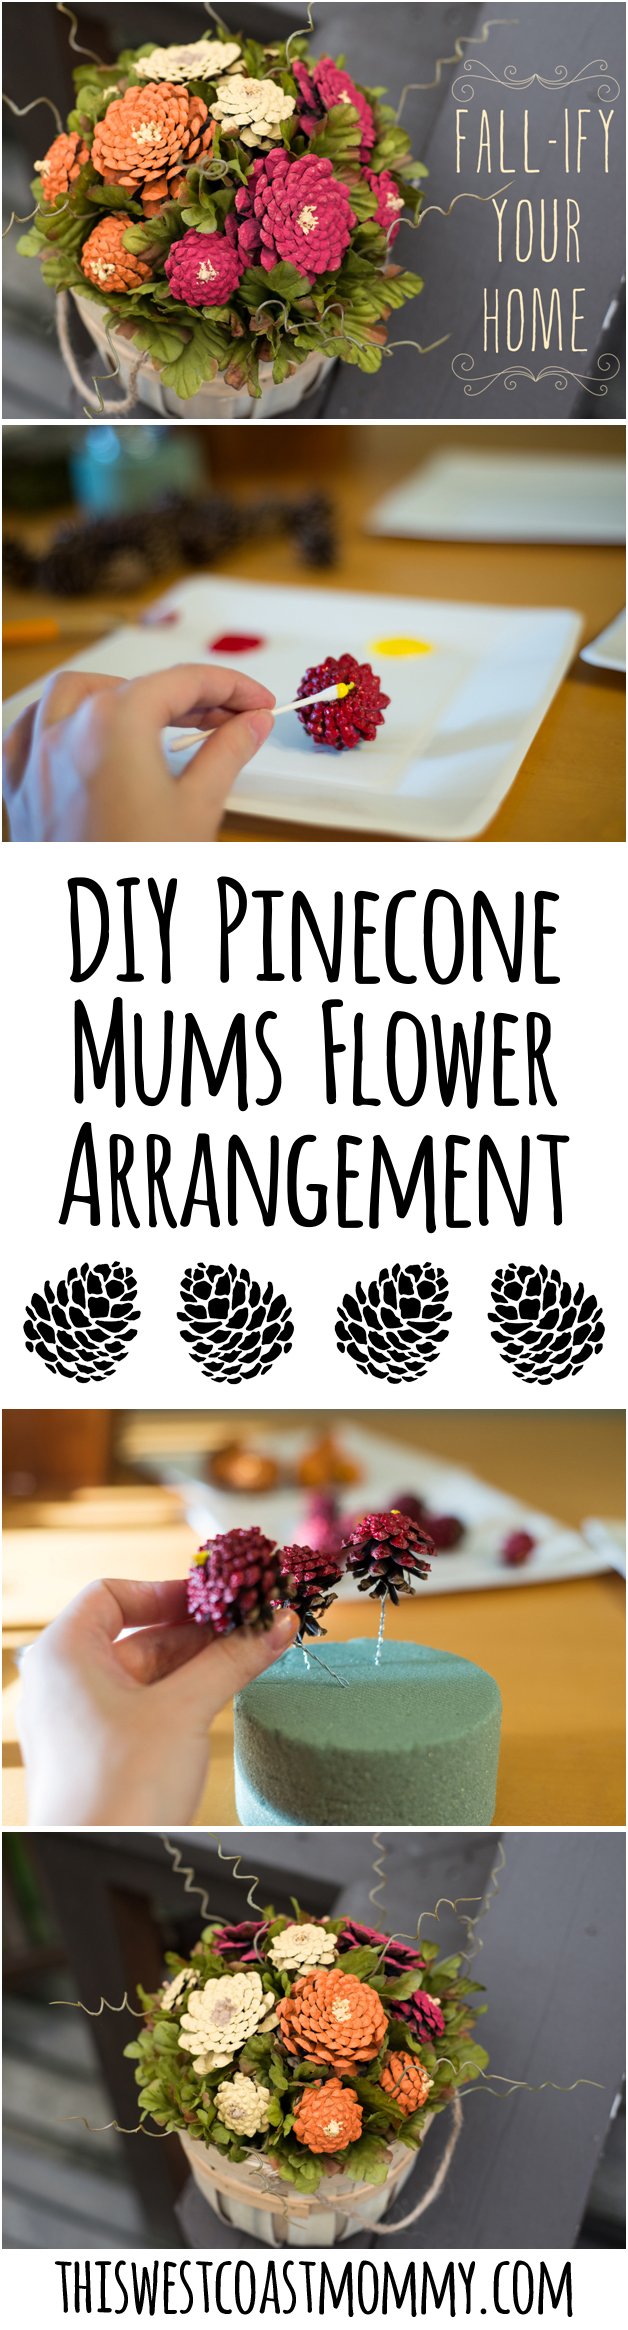 Fall-ify your home with a beautiful arrangement of DIY pinecone mums. Get step-by-step instructions here!